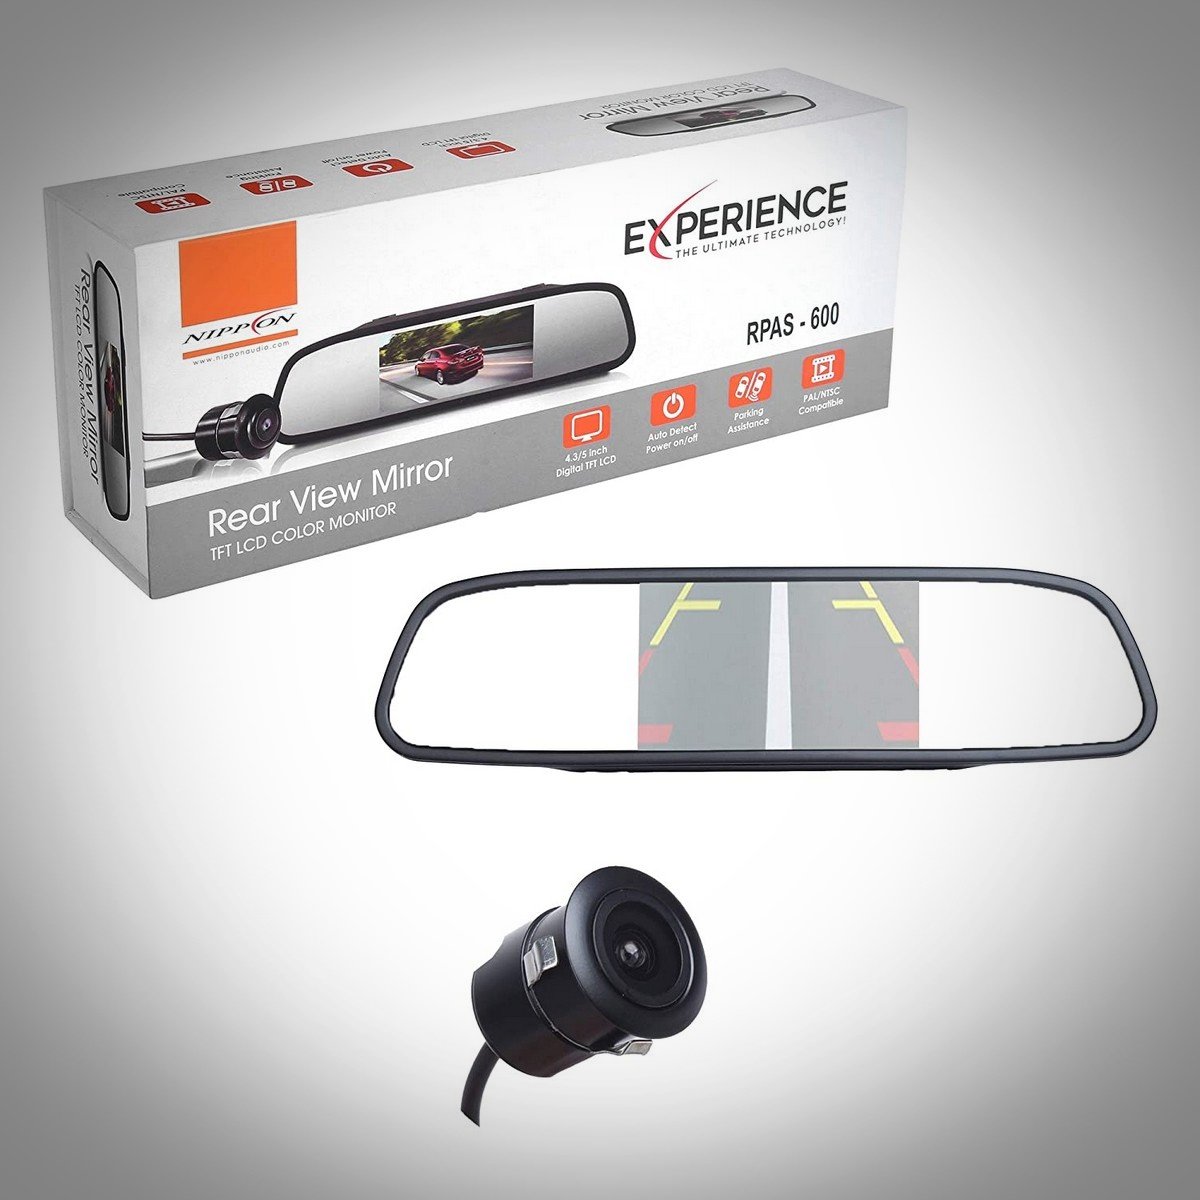 nippon rpas 600 rear view mirror with camera